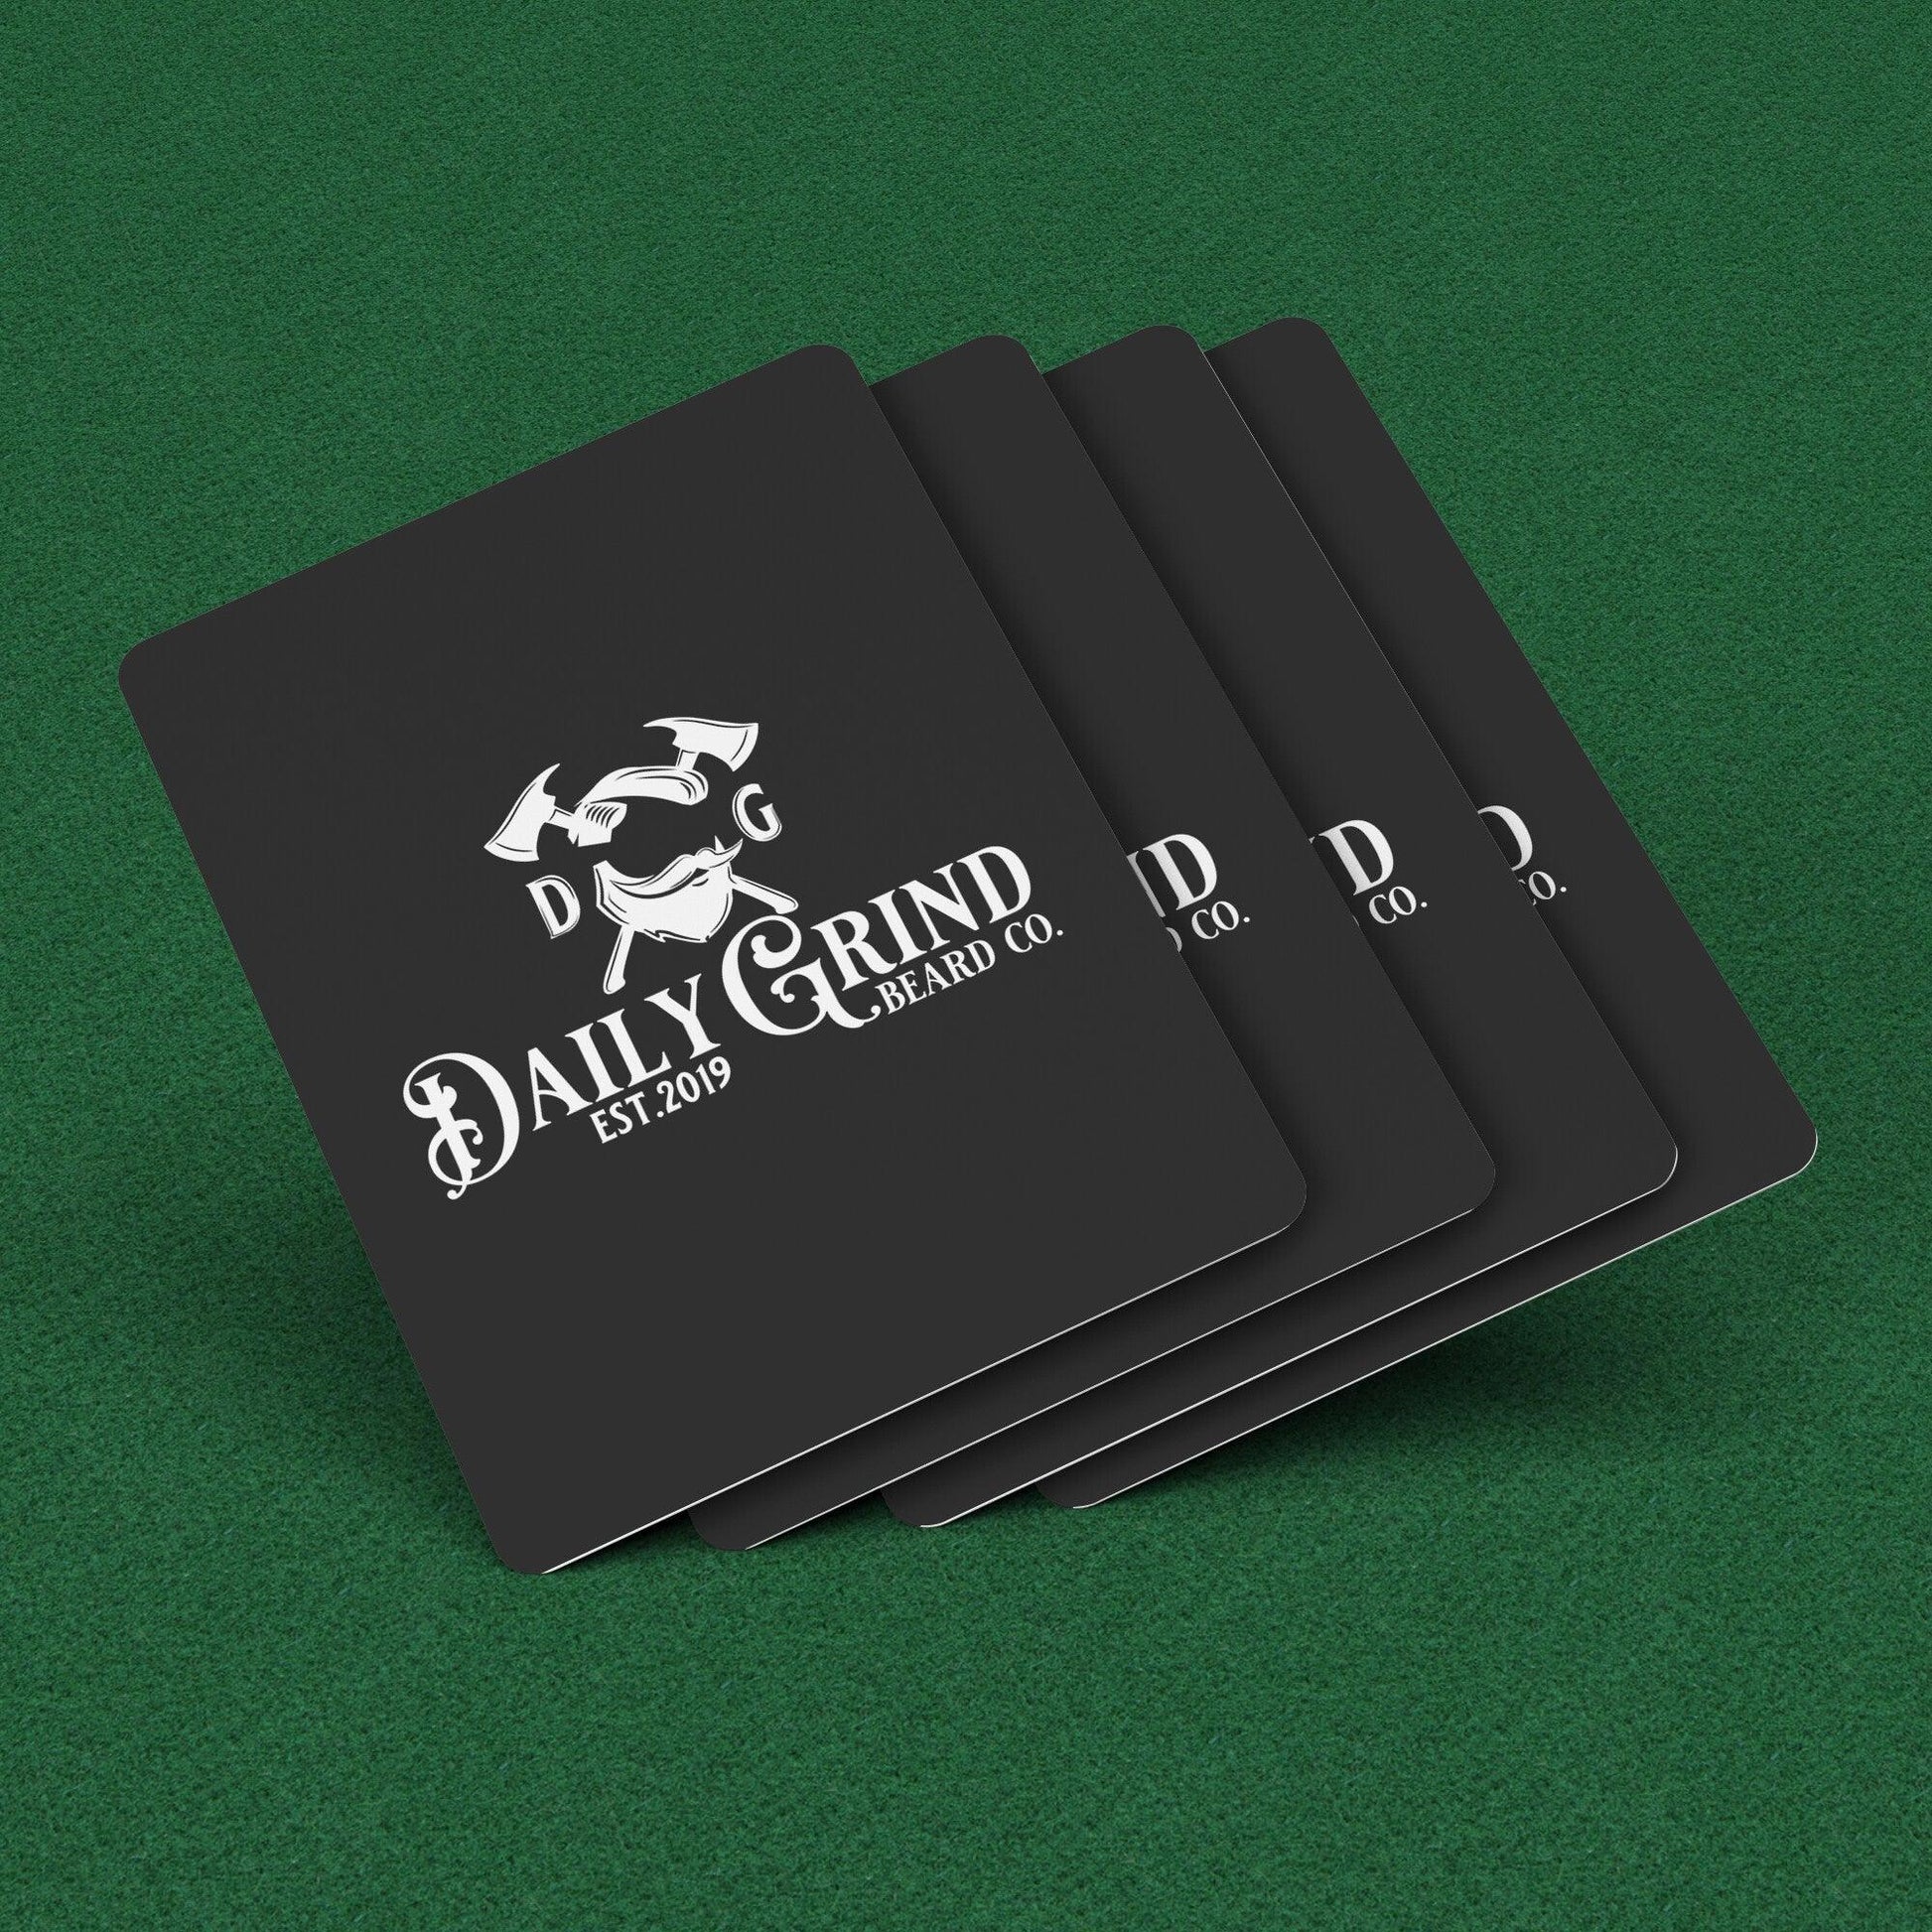 Daily Grind playing cards - Daily Grind